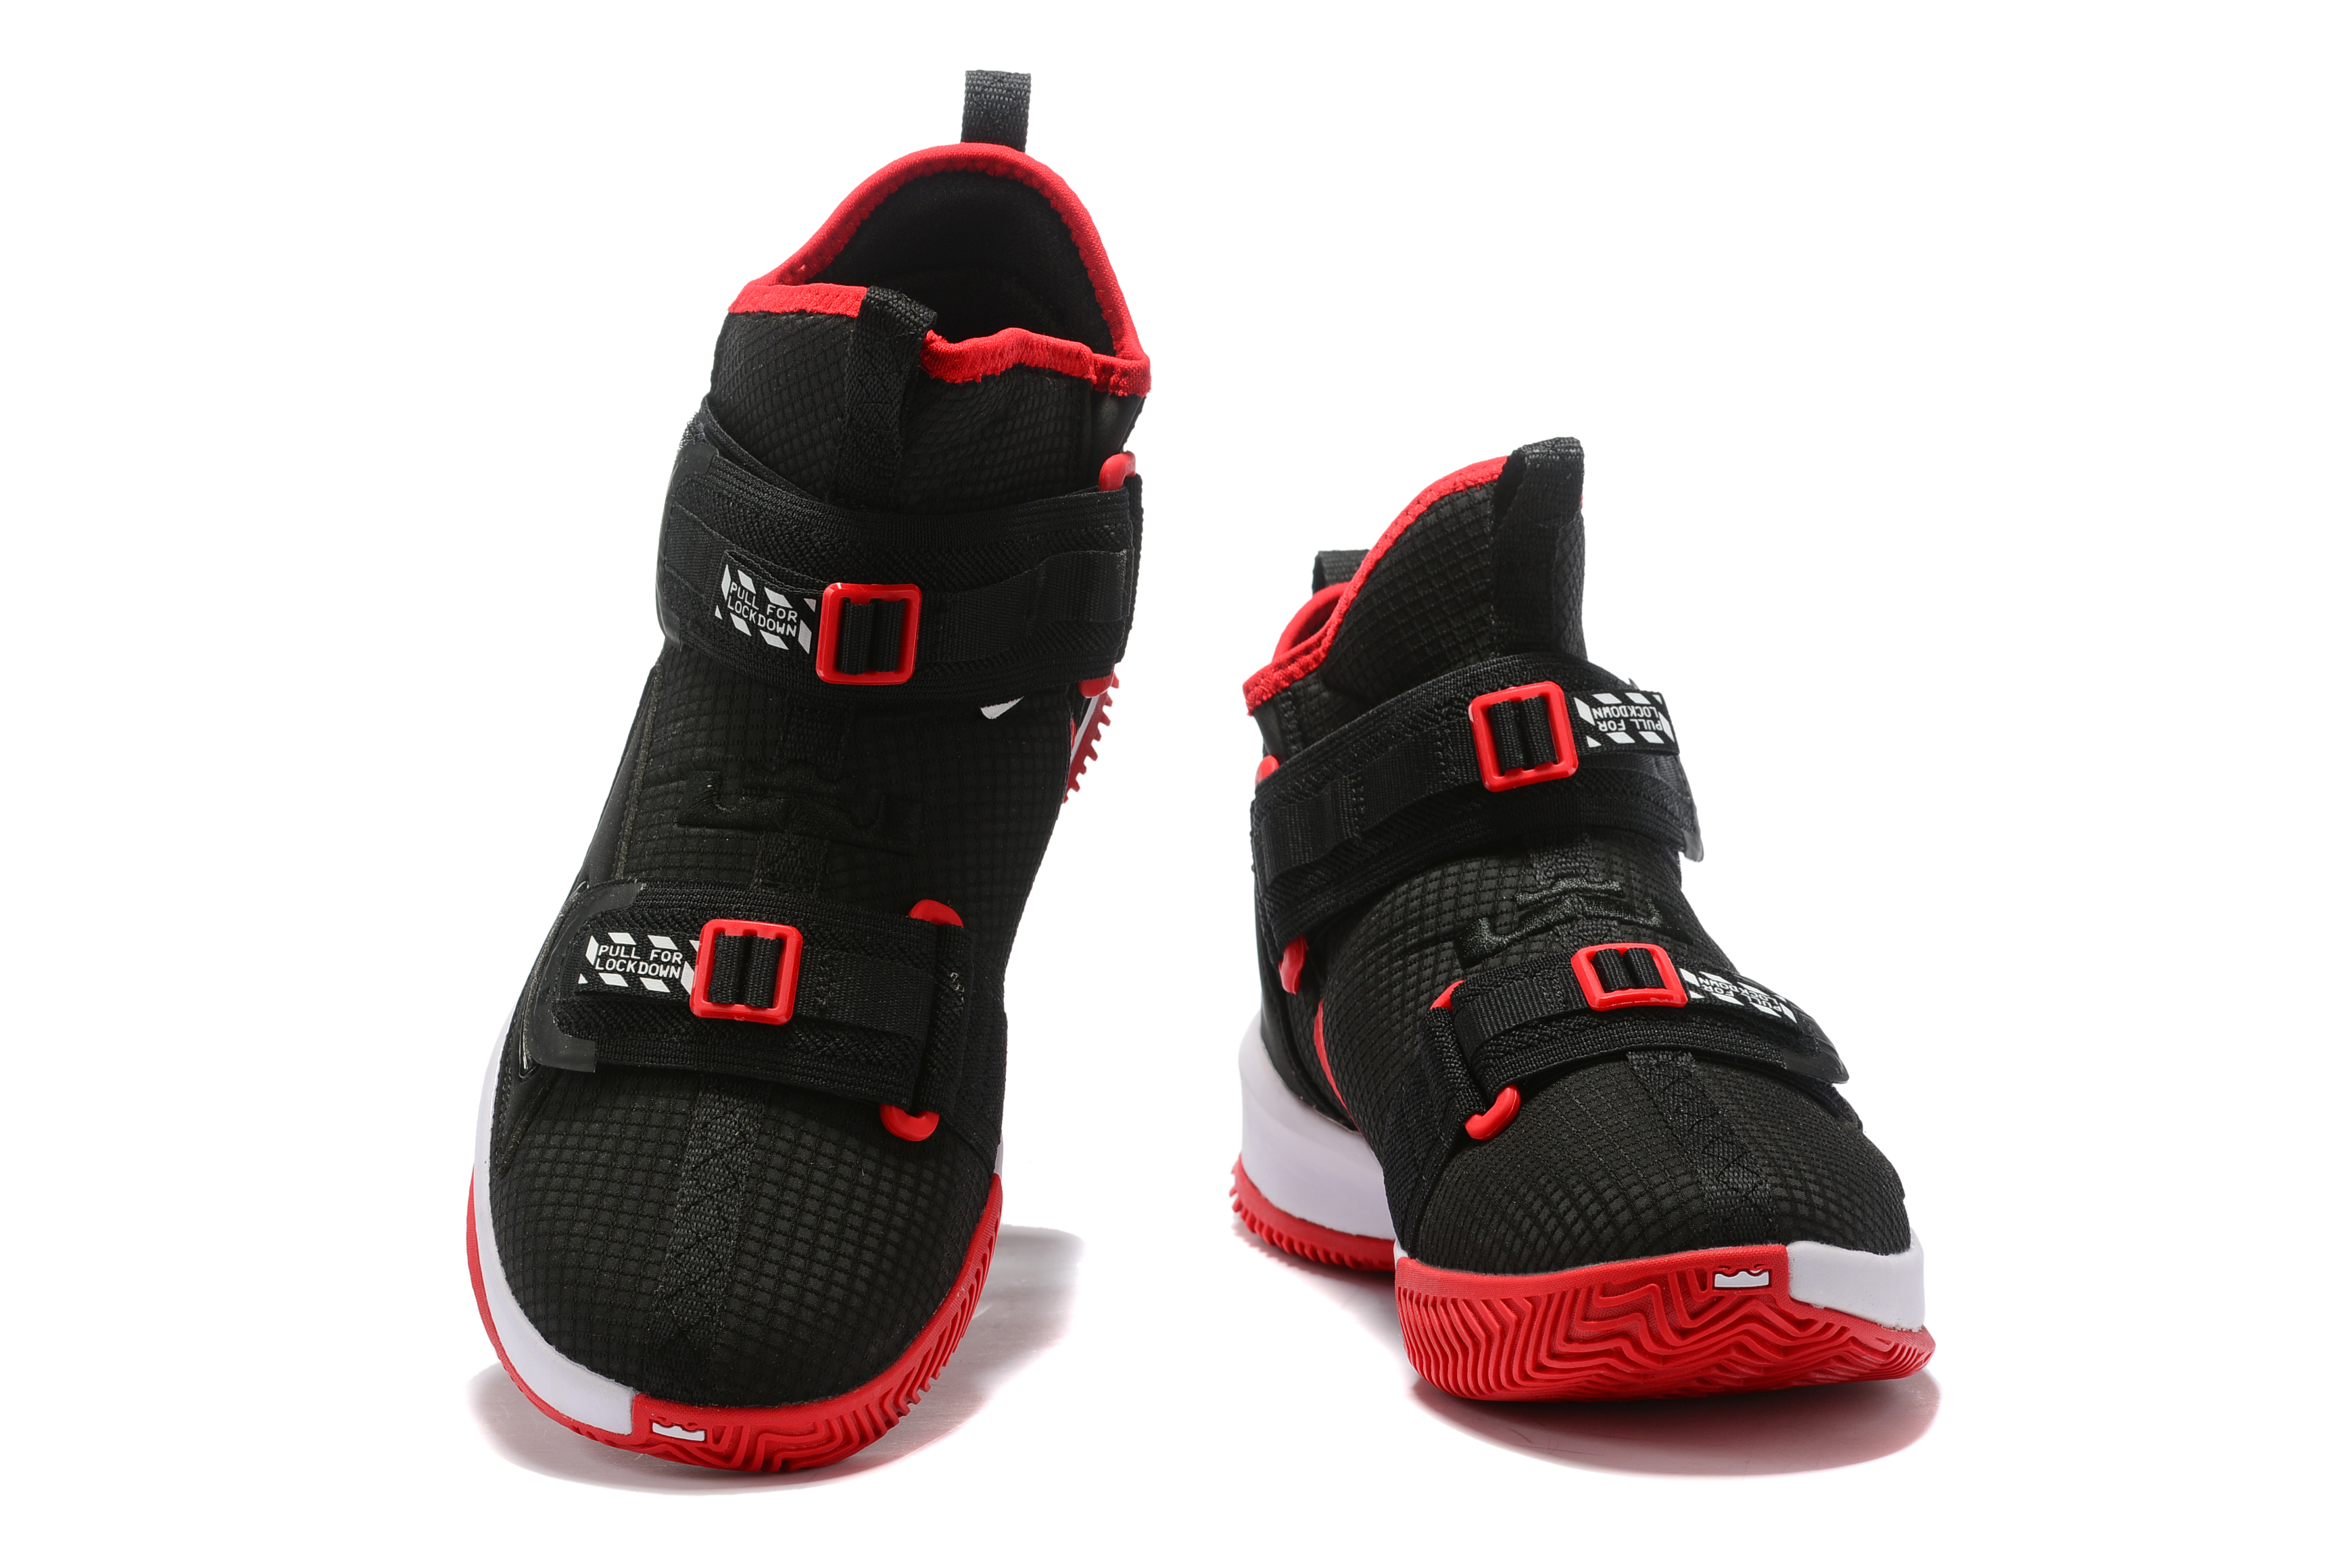 lebron soldier 13 bred